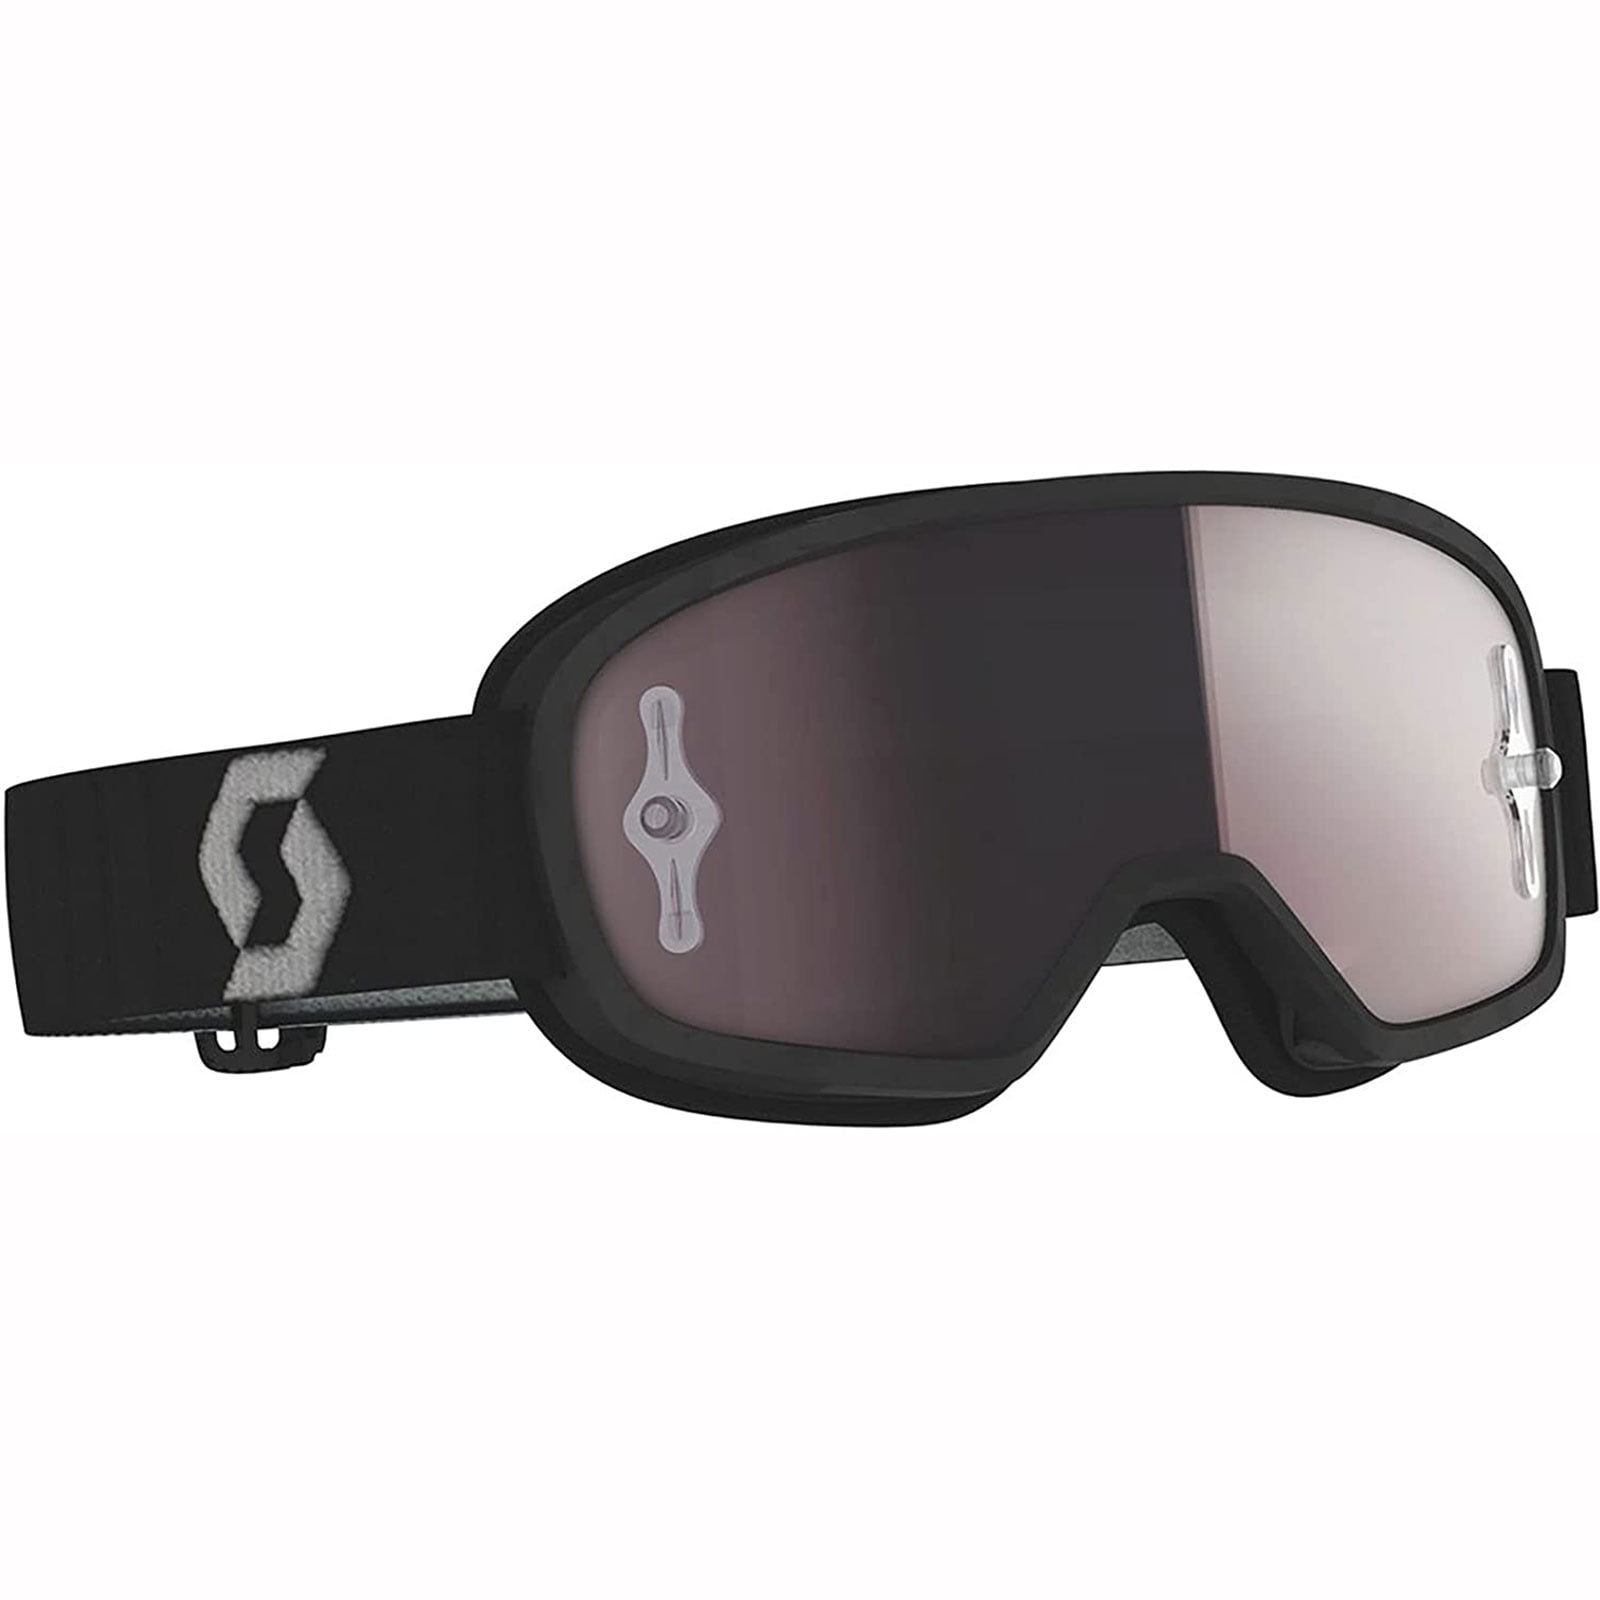 Scott Buzz Pro Youth MX Offroad Goggles